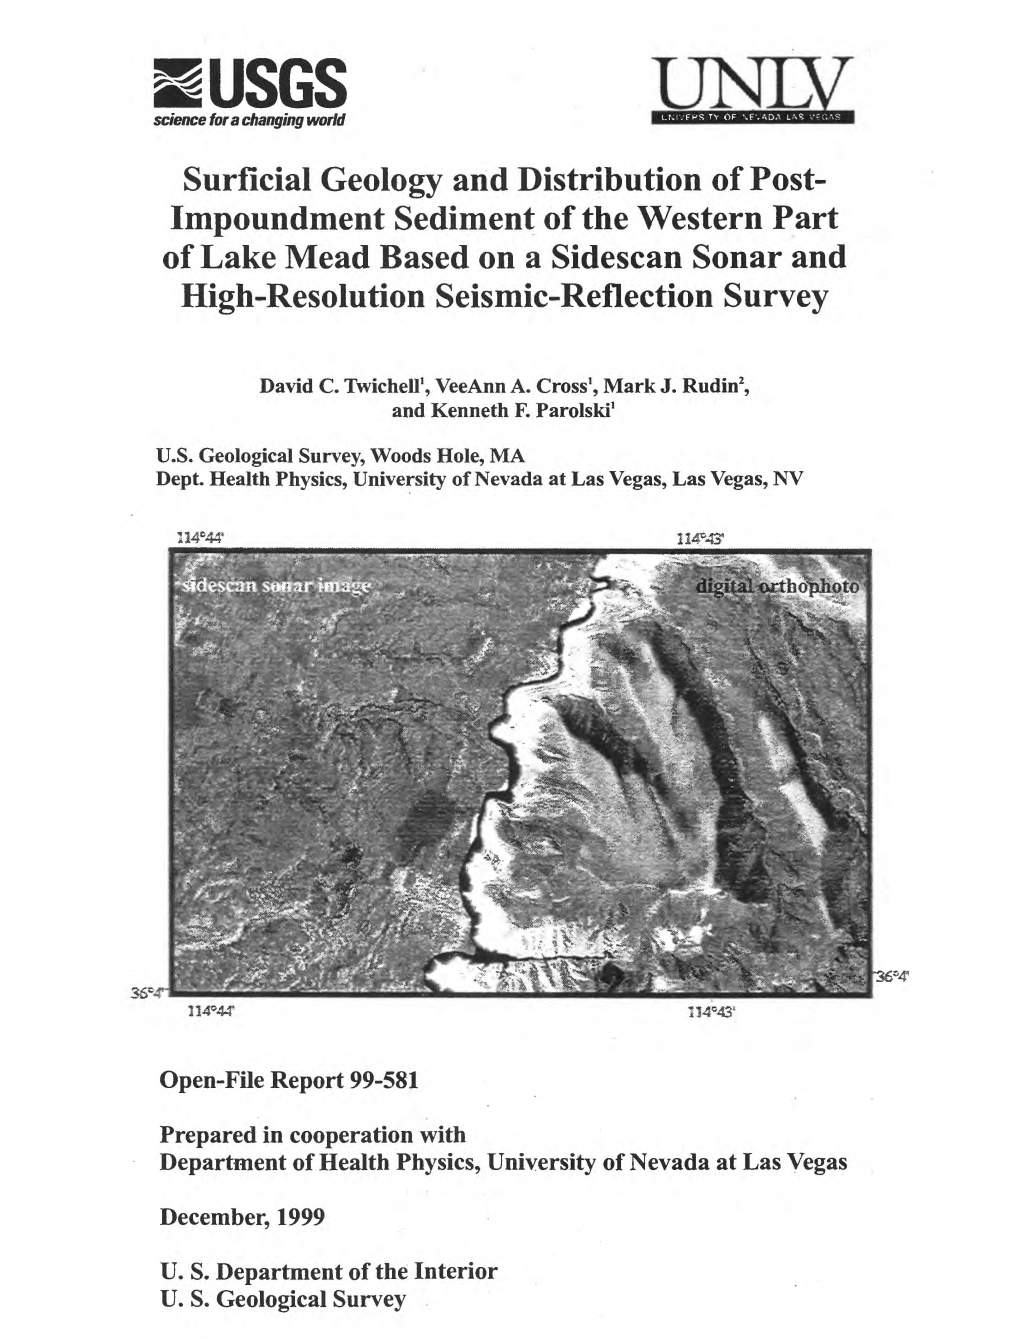 Surficial Geology and Distribution of Post- Impoundment Sediment of the Western Part of Lake Mead Based on a Sidescan Sonar